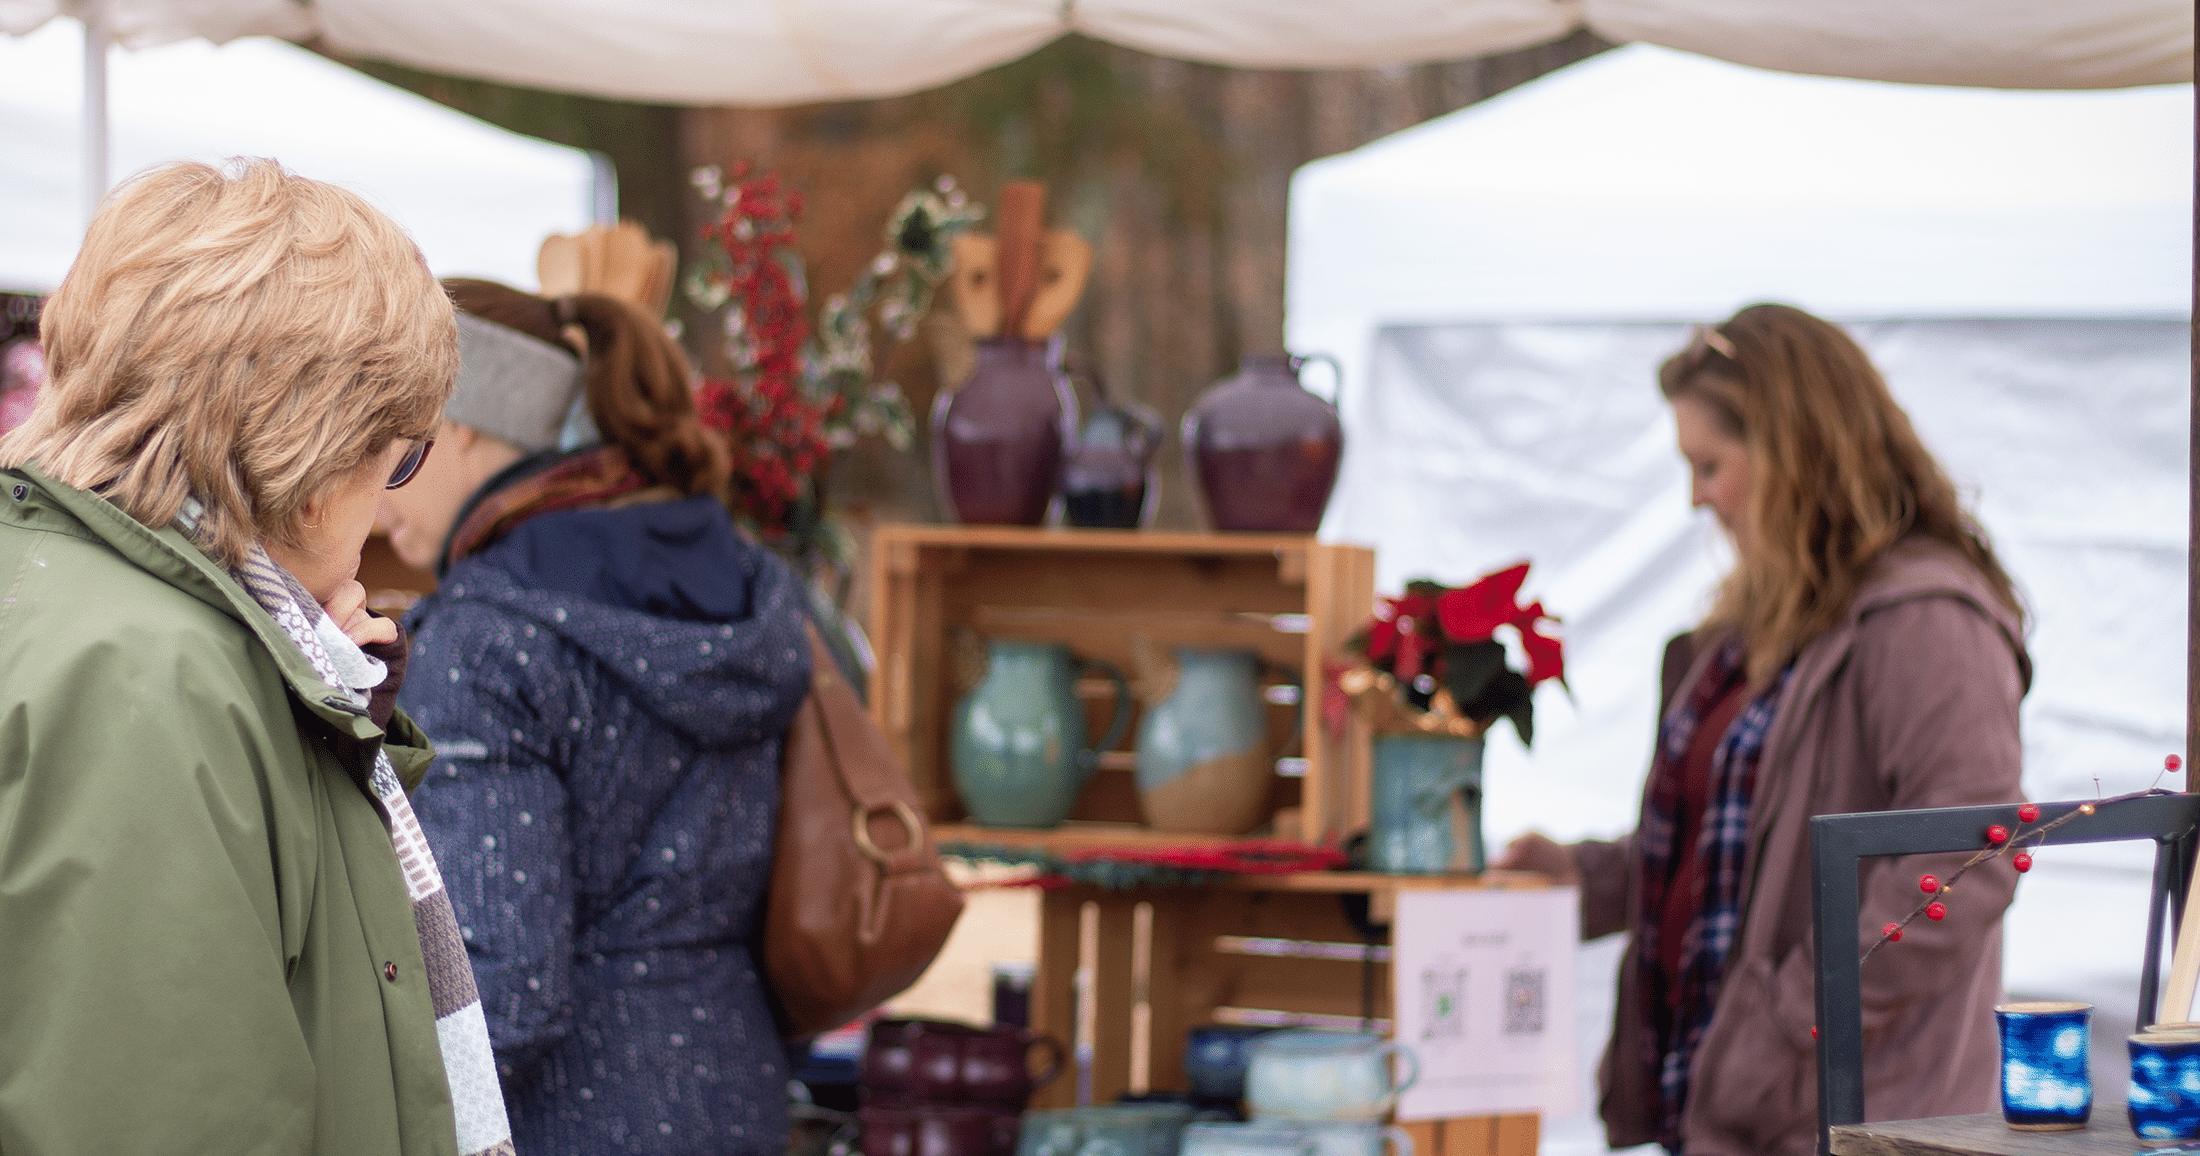 alt= Fall Market Image Of Female Shopper Looking at Goods